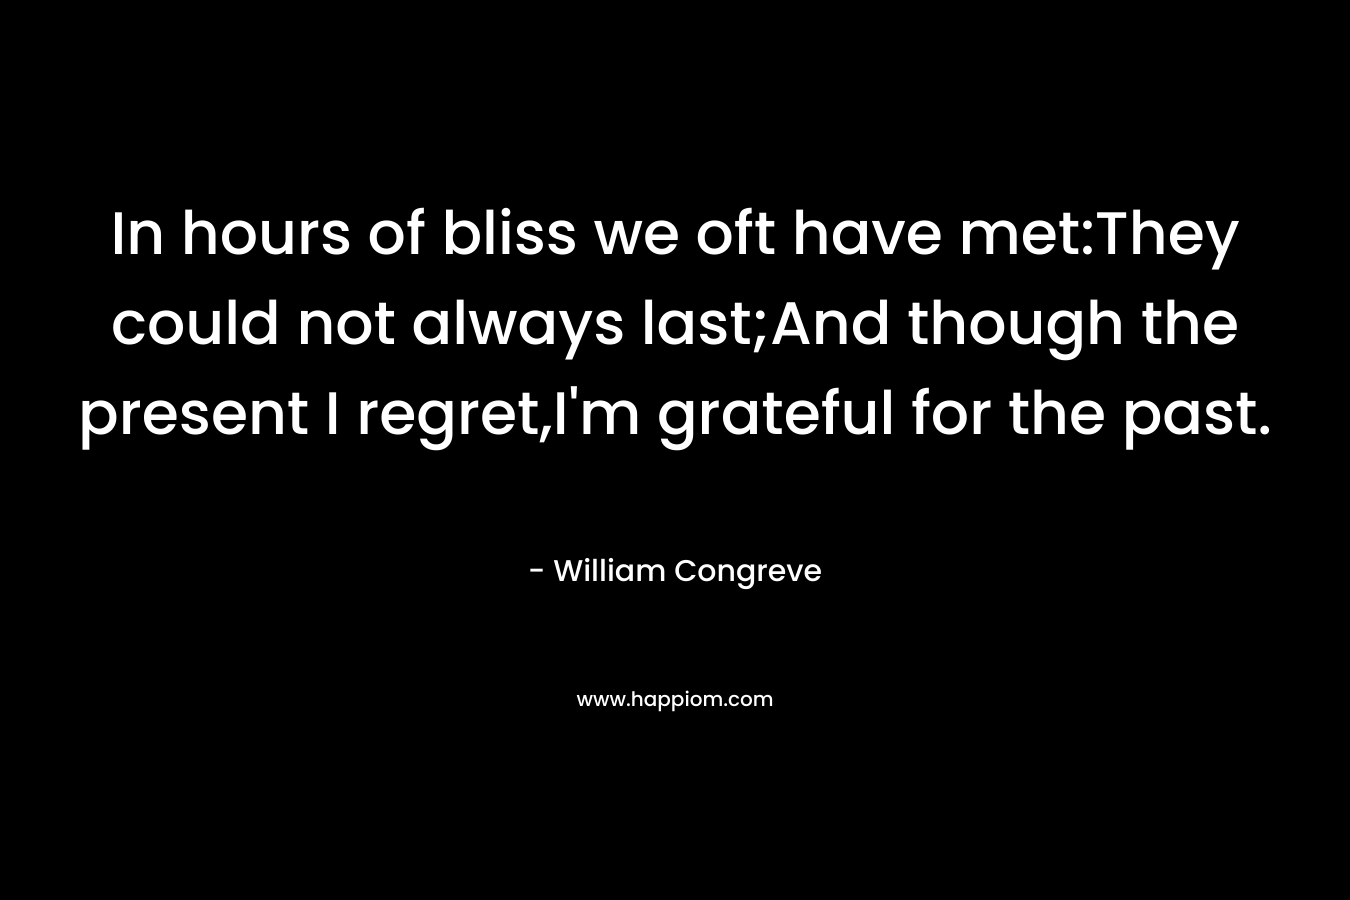 In hours of bliss we oft have met:They could not always last;And though the present I regret,I’m grateful for the past. – William Congreve